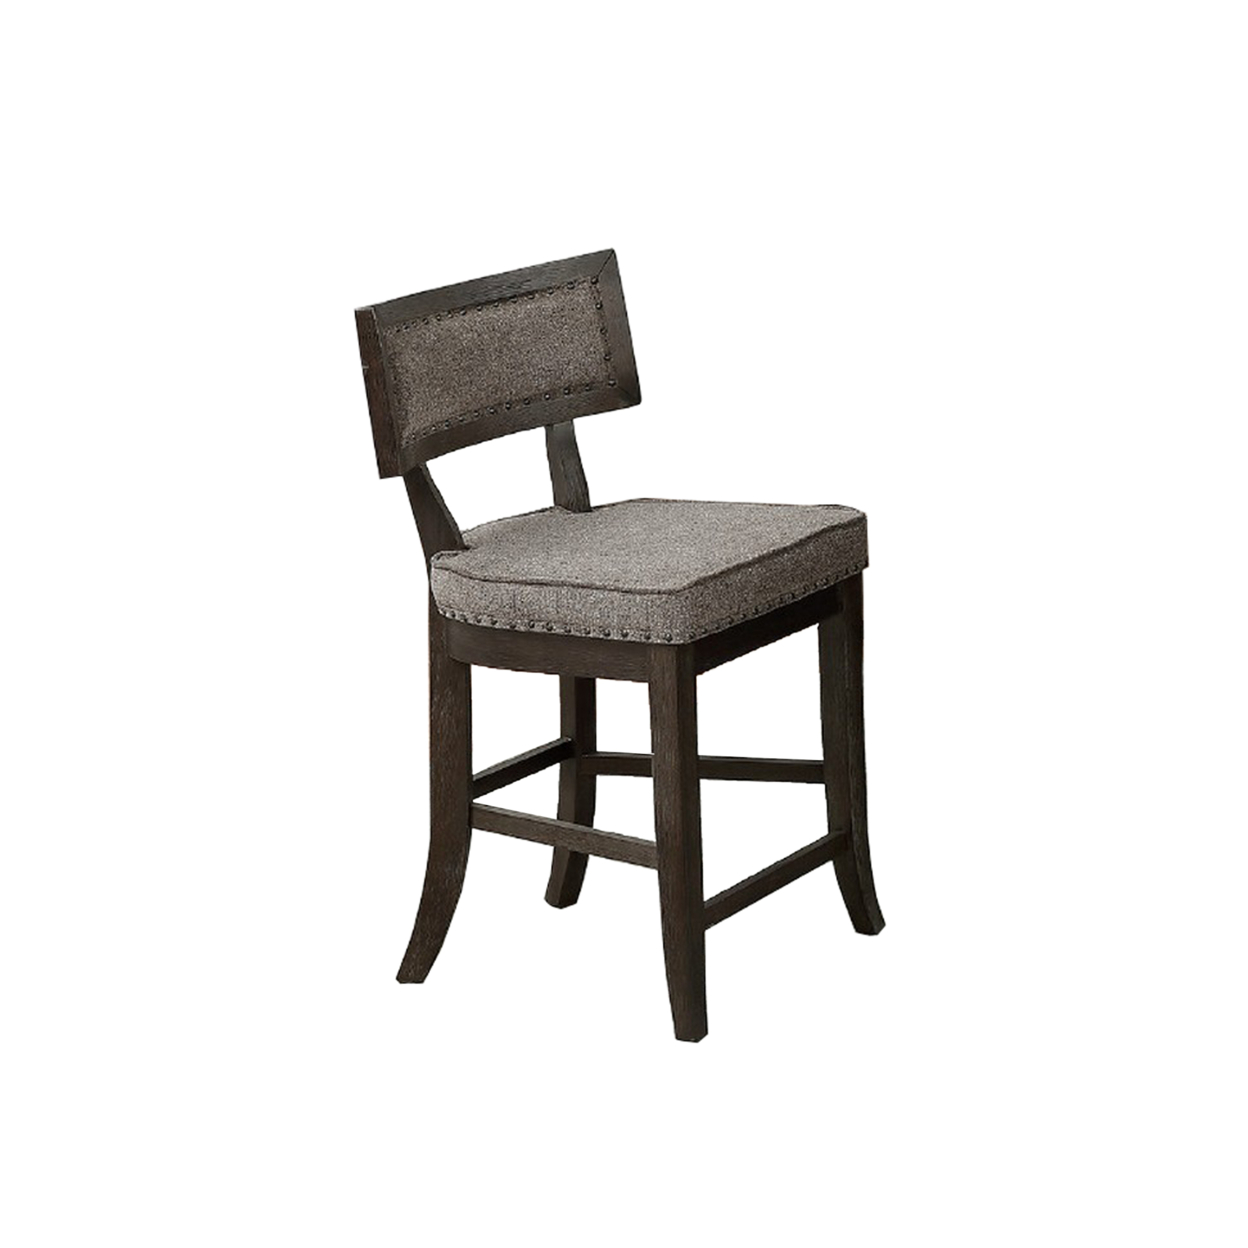 Curved Top Wooden High Chair With Flared Legs, Set Of 2, Gray- Saltoro Sherpi